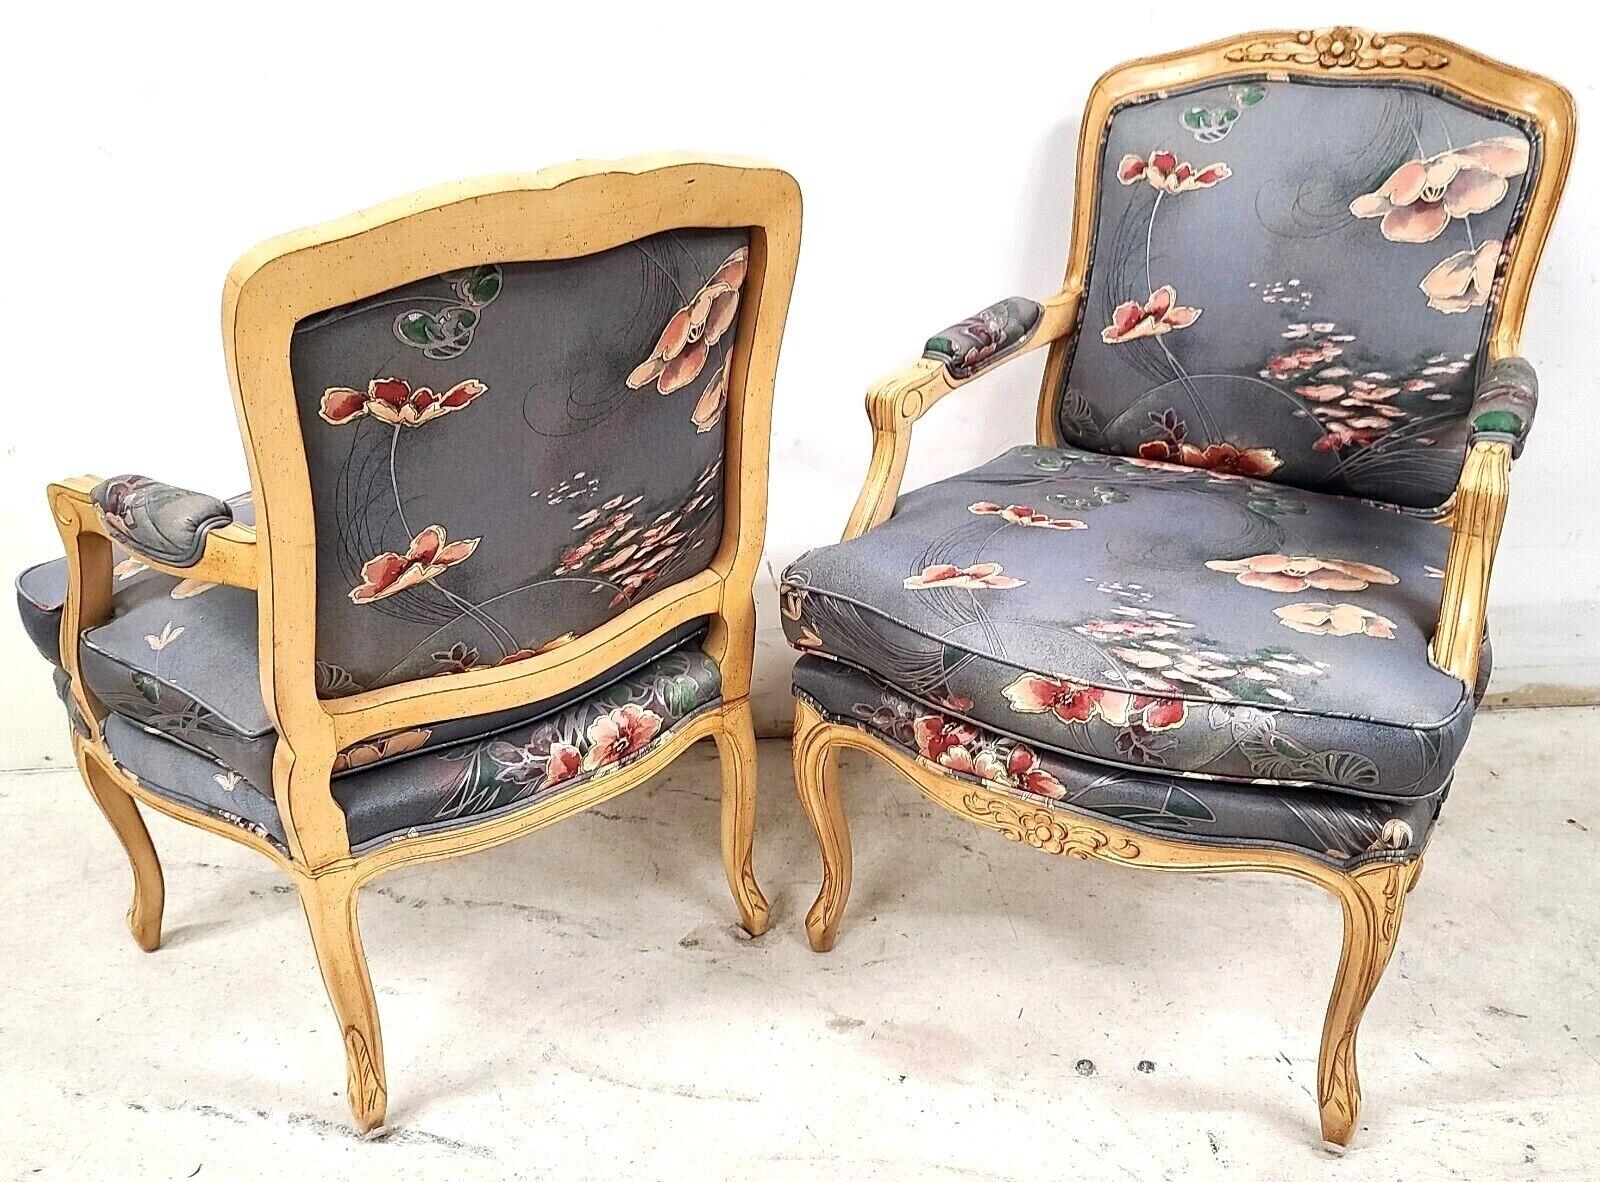 For FULL item description be sure to click on CONTINUE READING at the bottom of this listing.

Offering One Of Our Recent Palm Beach Estate Fine Furniture Acquisitions Of A
Pair of Vintage Designer French Provincial Accent Chairs by